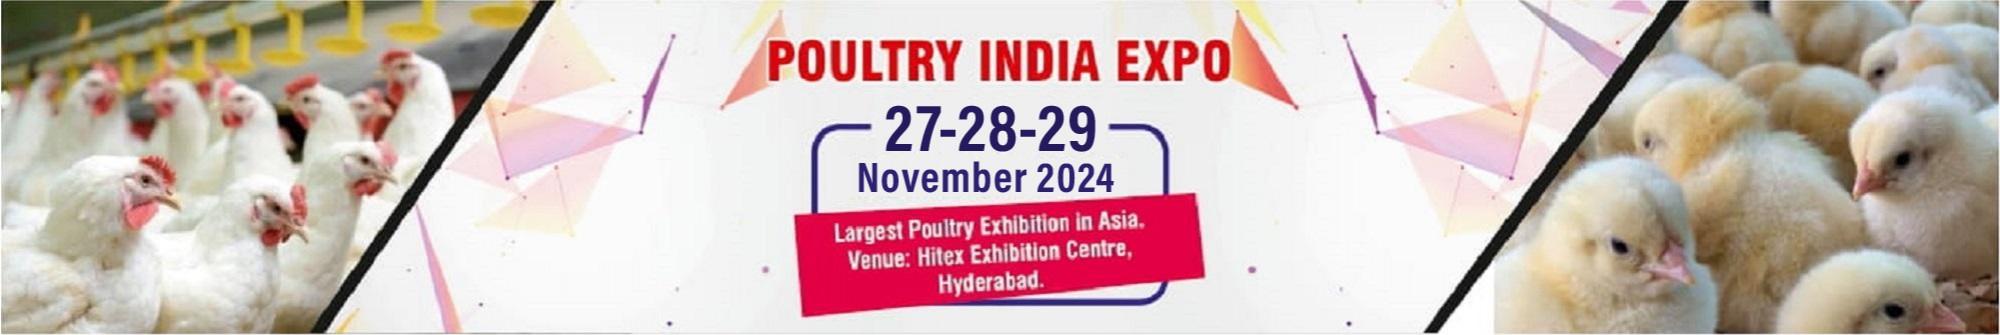 About Poultry India